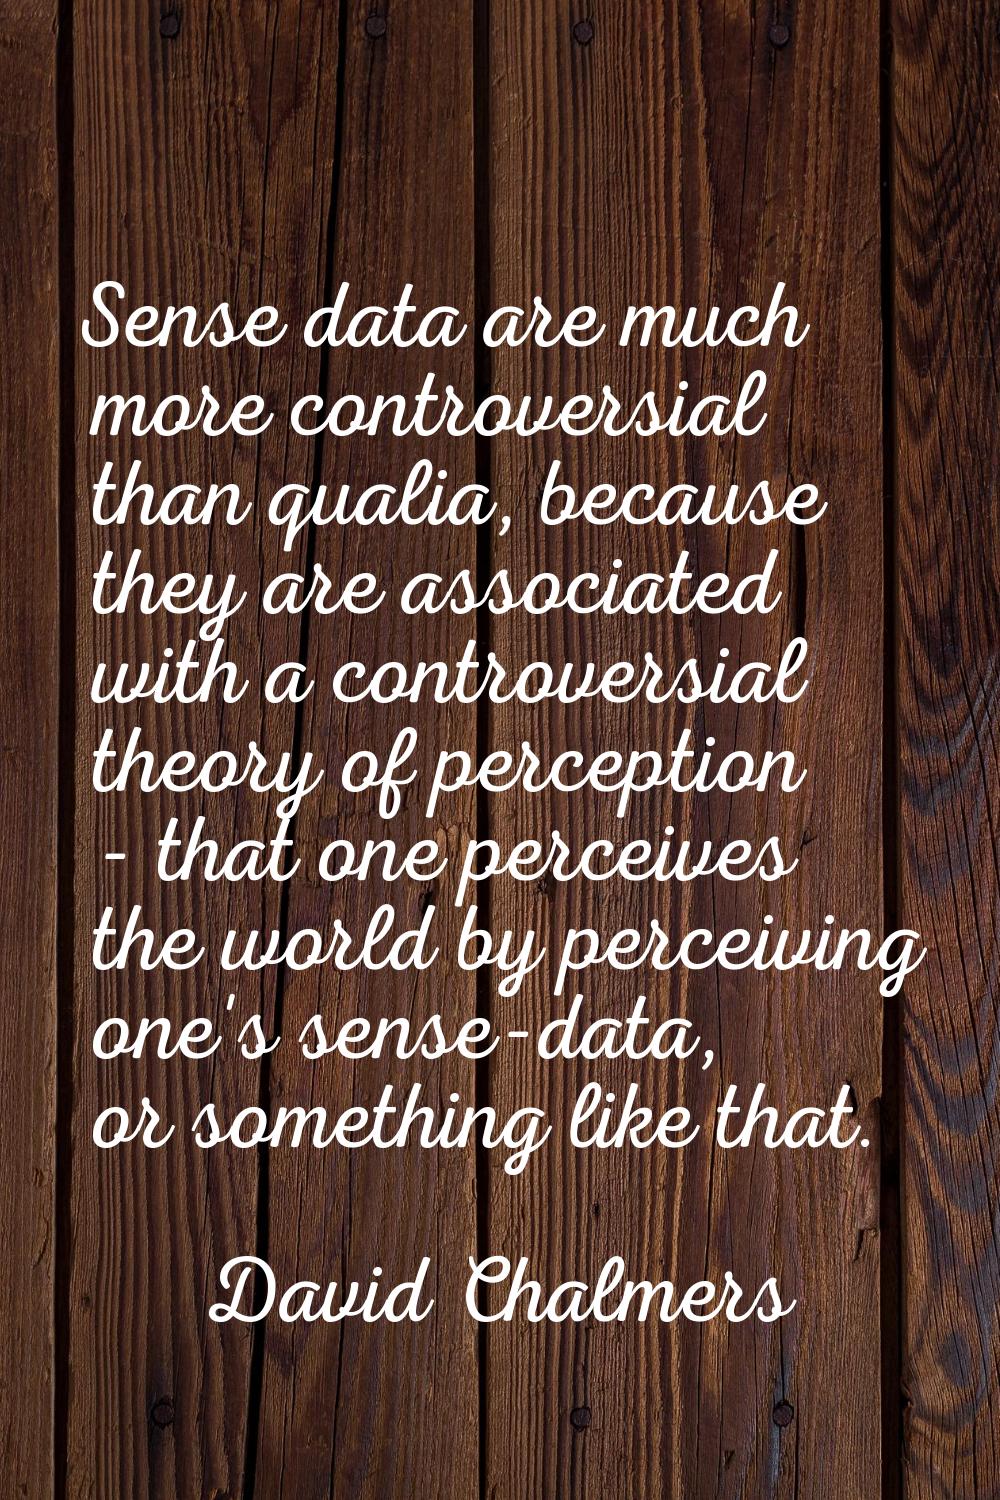 Sense data are much more controversial than qualia, because they are associated with a controversia